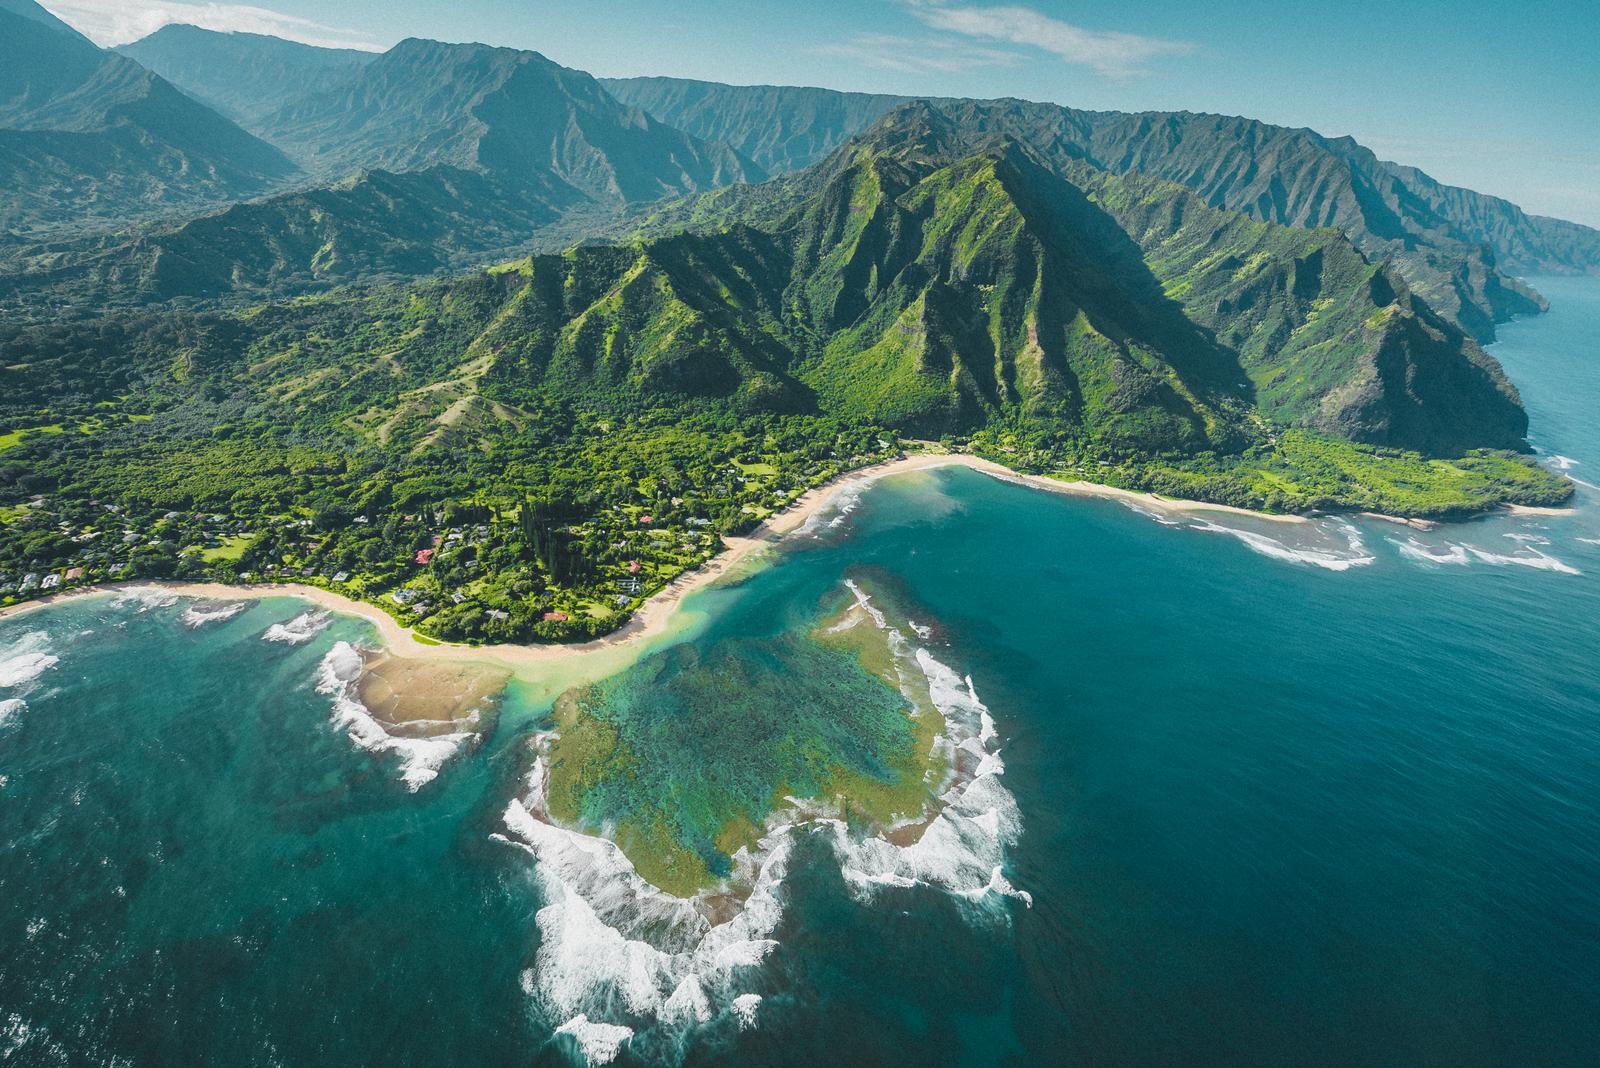 Can You Pass This Geography Quiz Where Every Question Comes With a 🐶 Dog-Related Clue? Hawaii